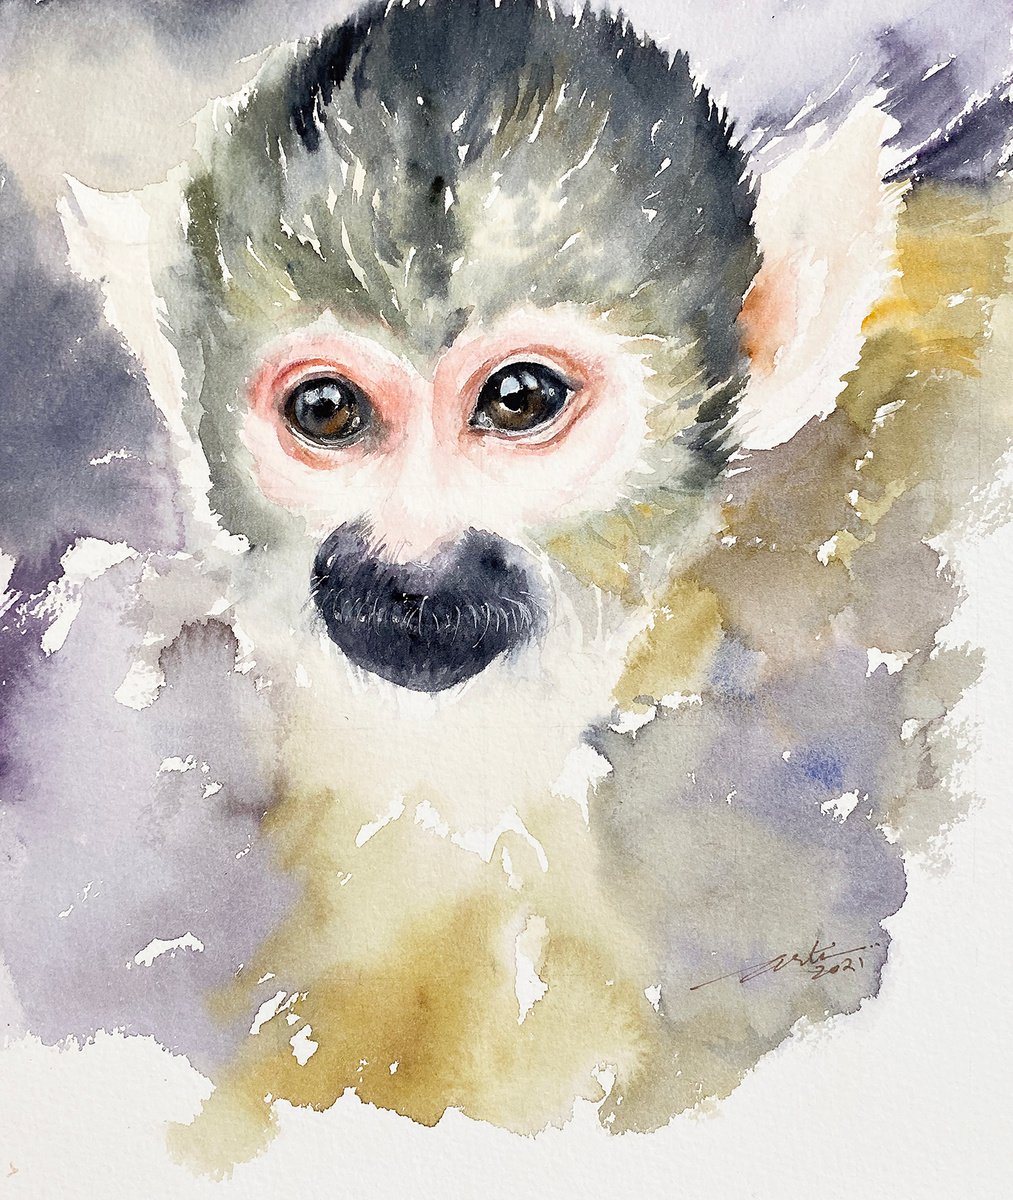 Mica the Squirrel Monkey by Arti Chauhan